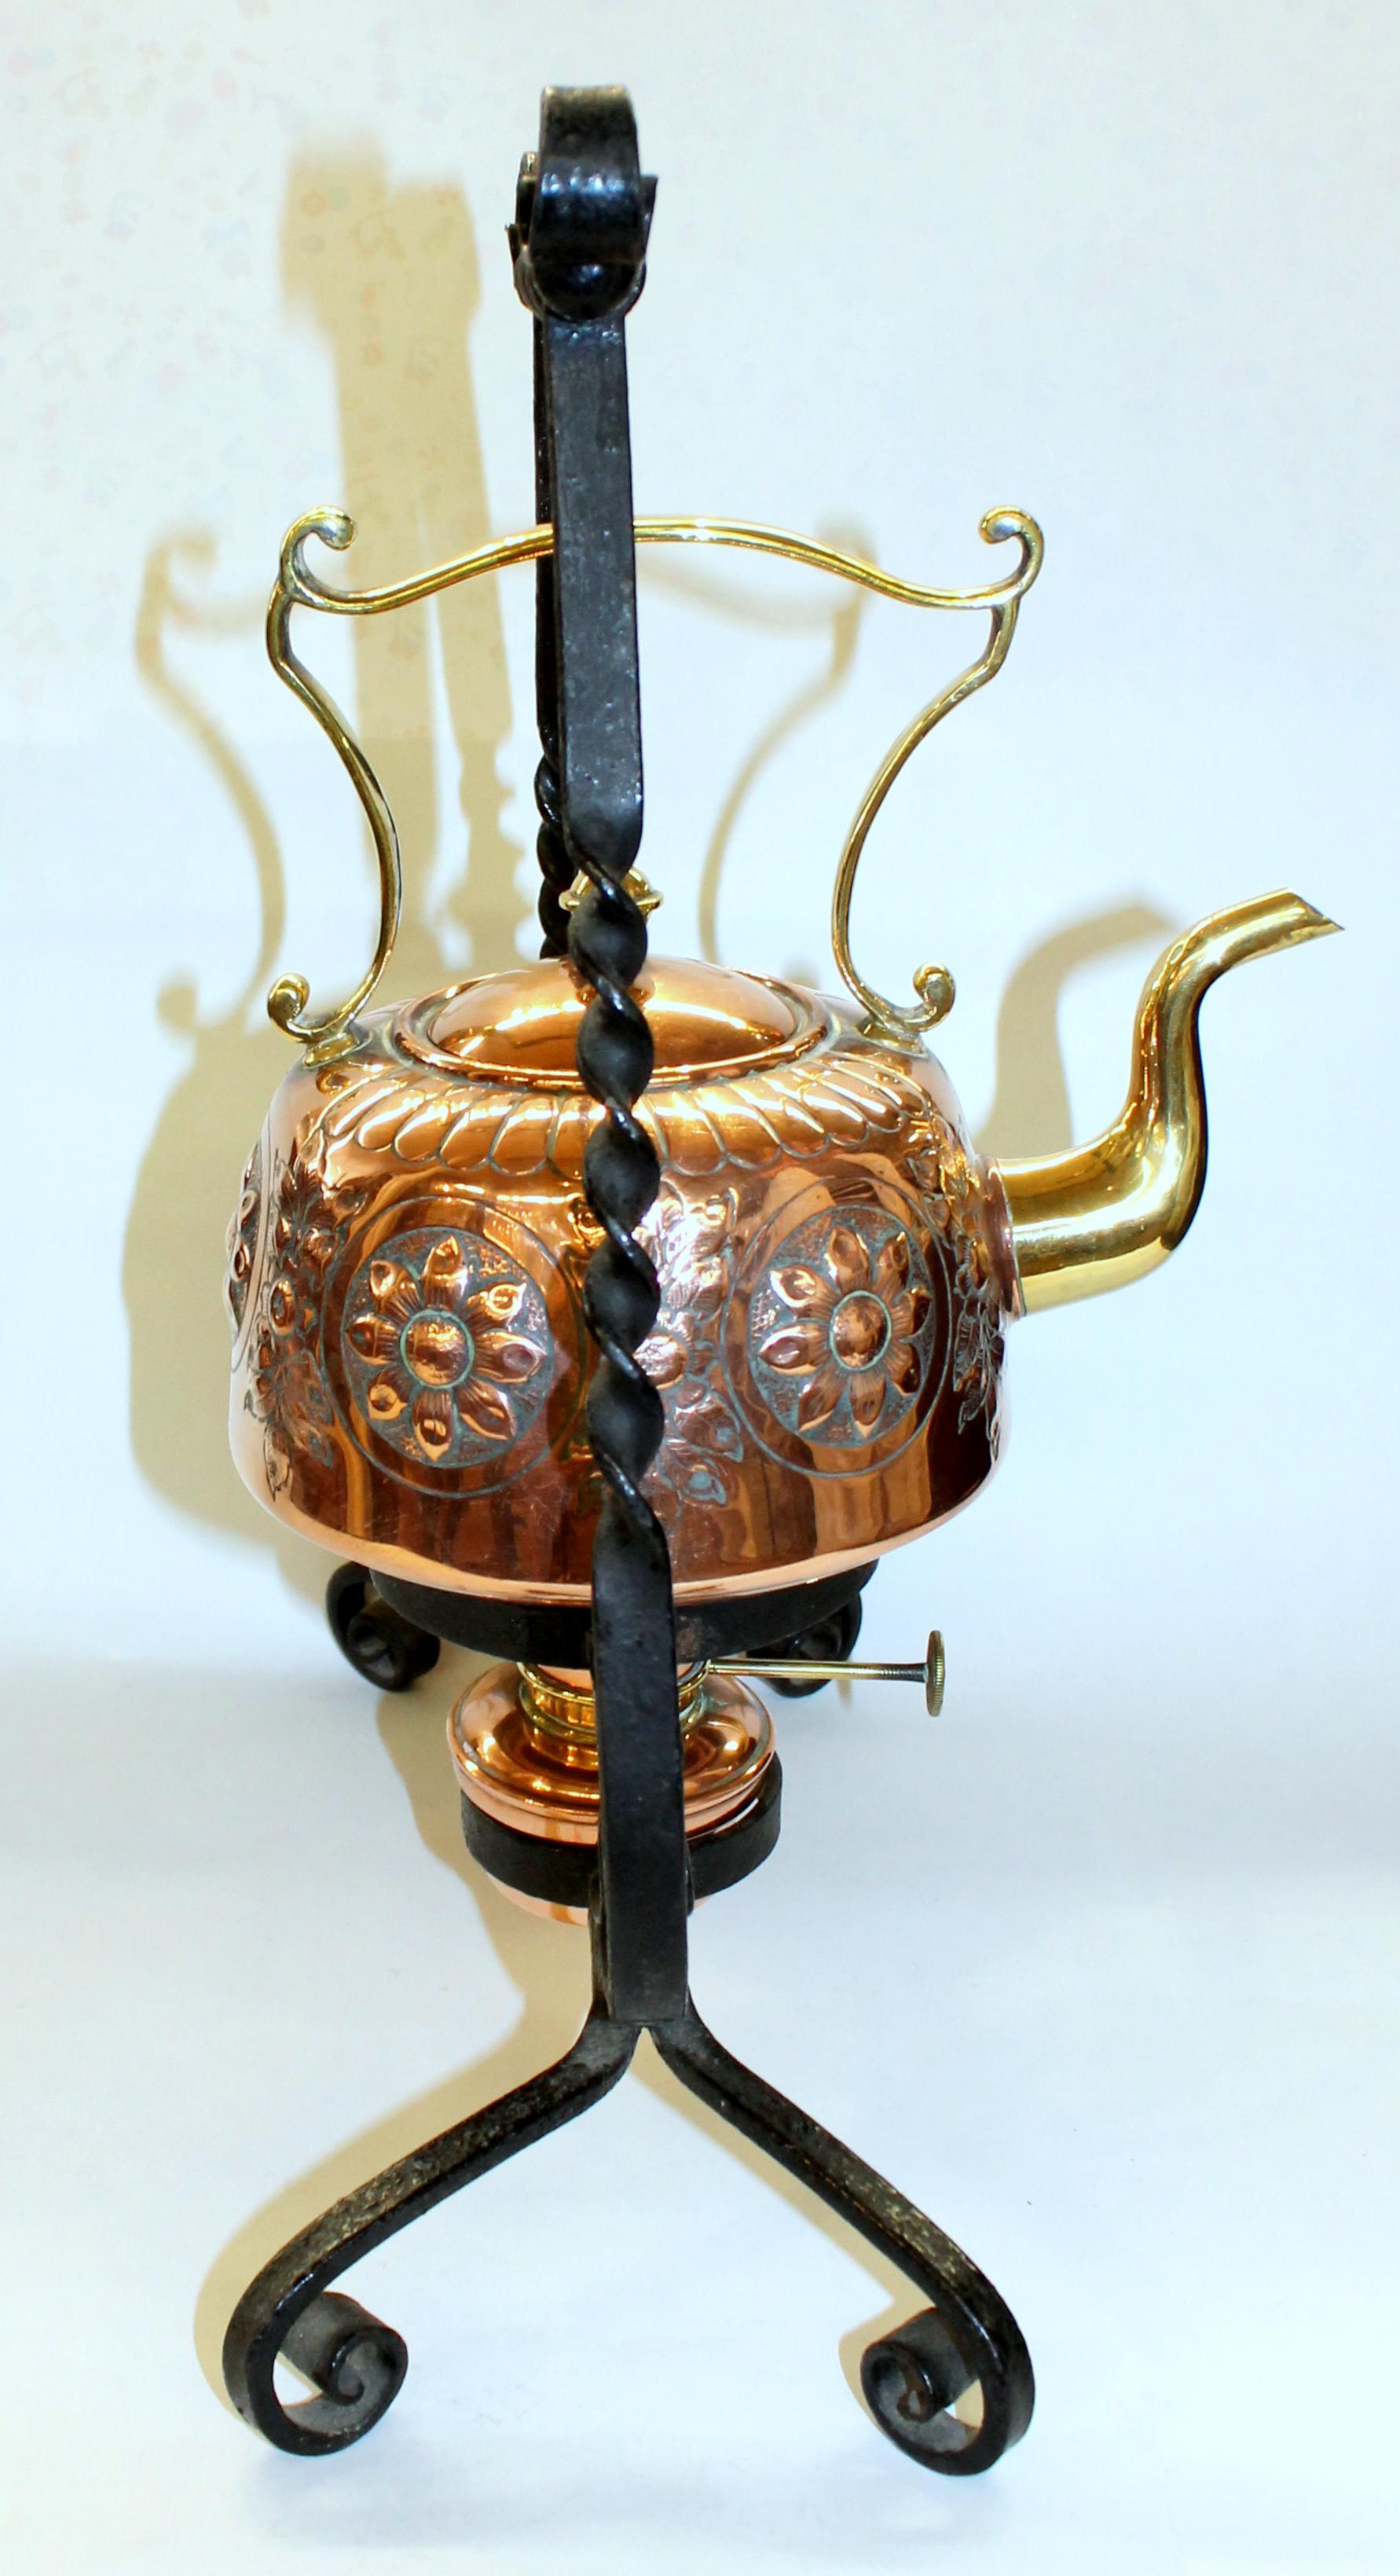 Metalwork Antique English Hand Chased Copper and Brass Kettle on Wrought Iron Stand